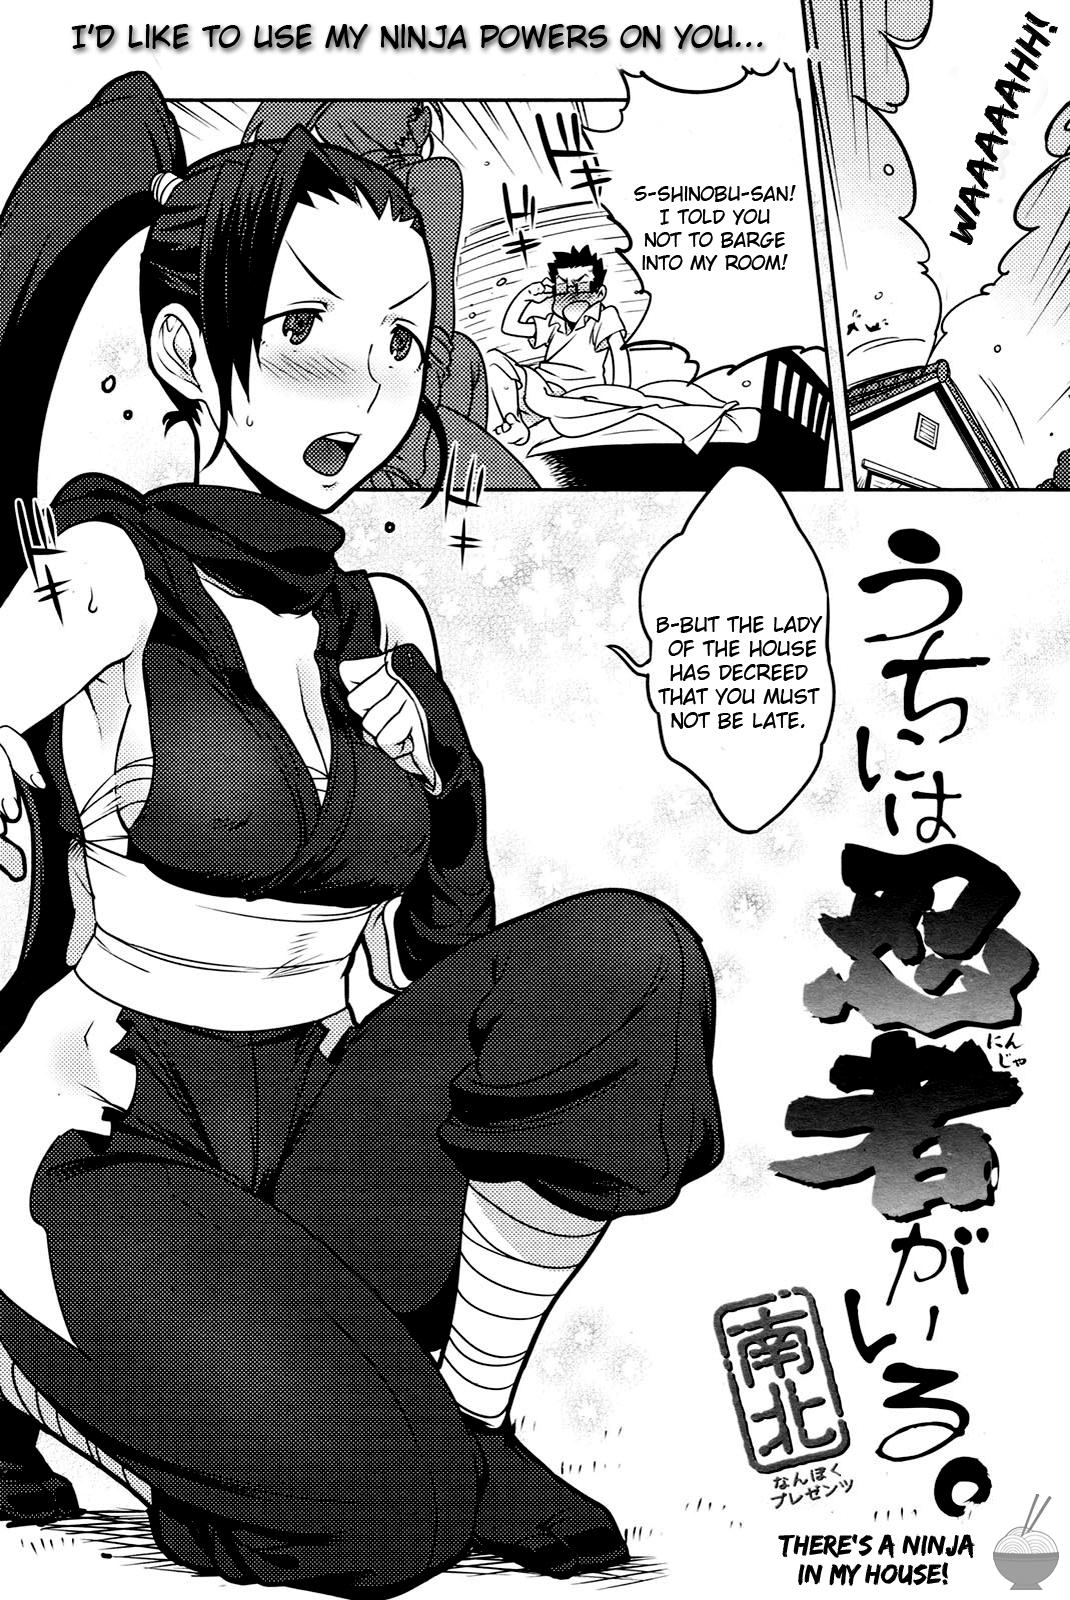 Best Blowjob There's a Ninja in my House! Culito - Page 2